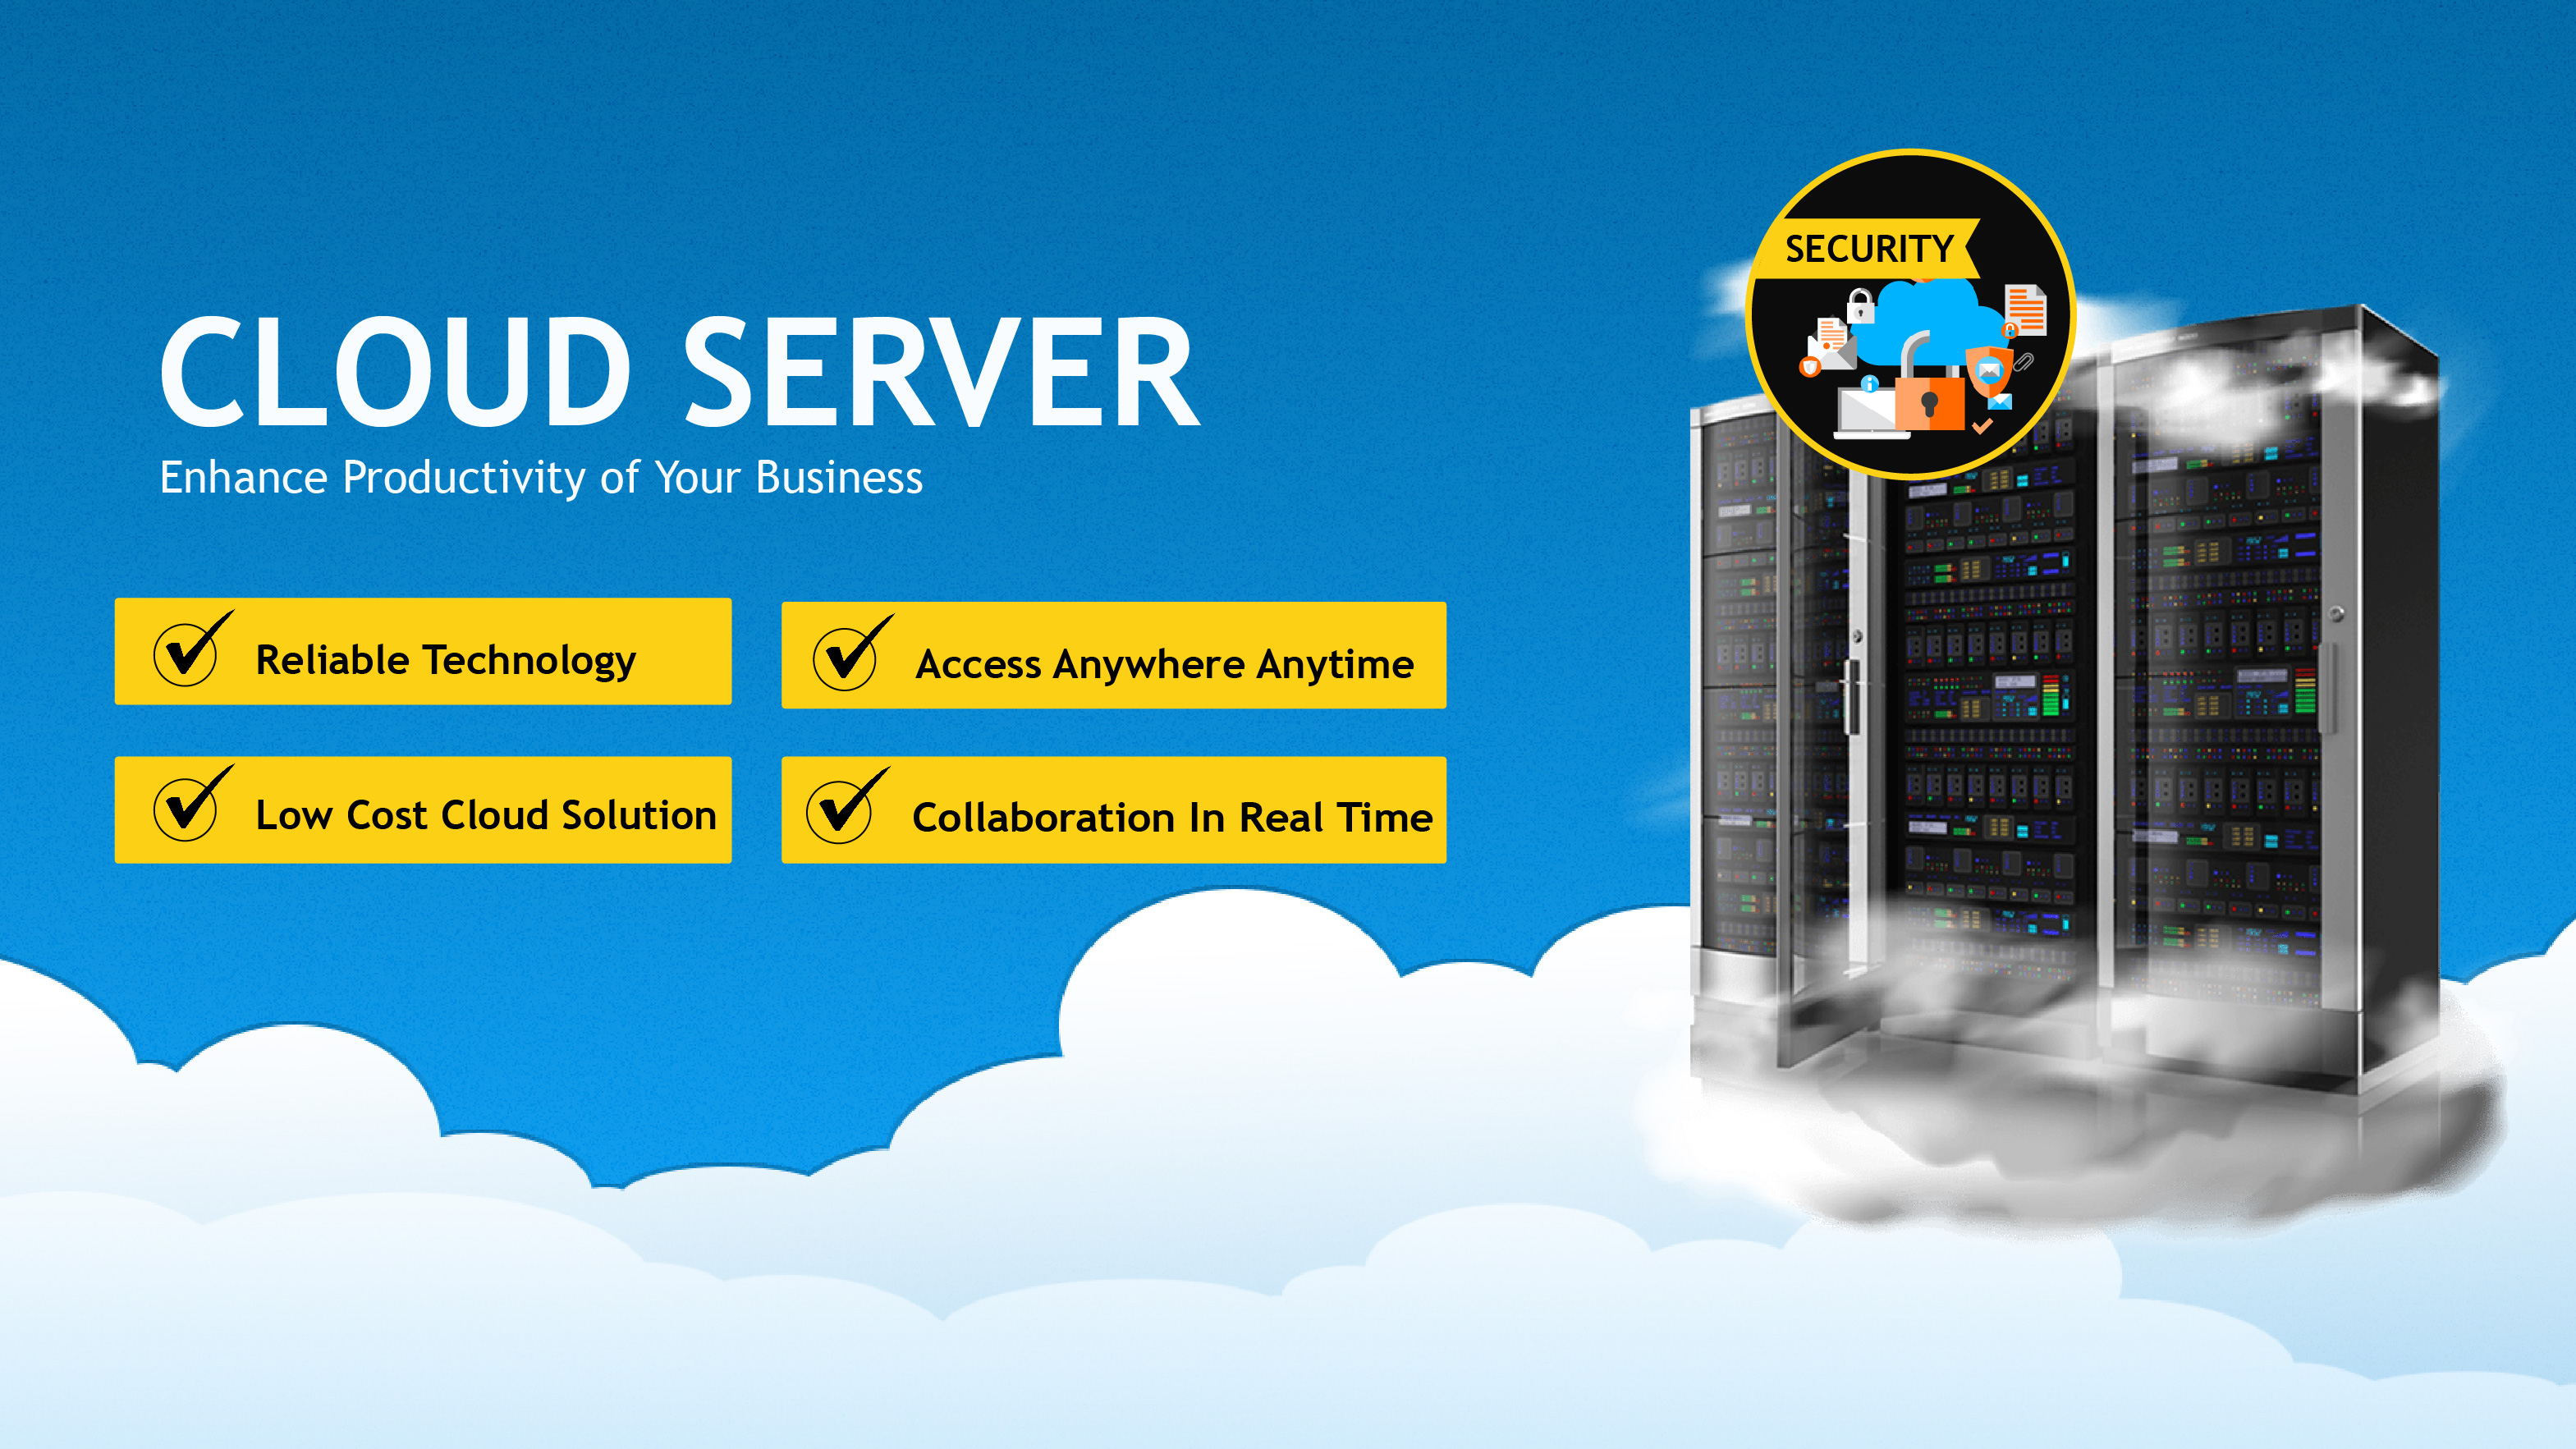 Enhance Productivity of Your Business with Cloud Server